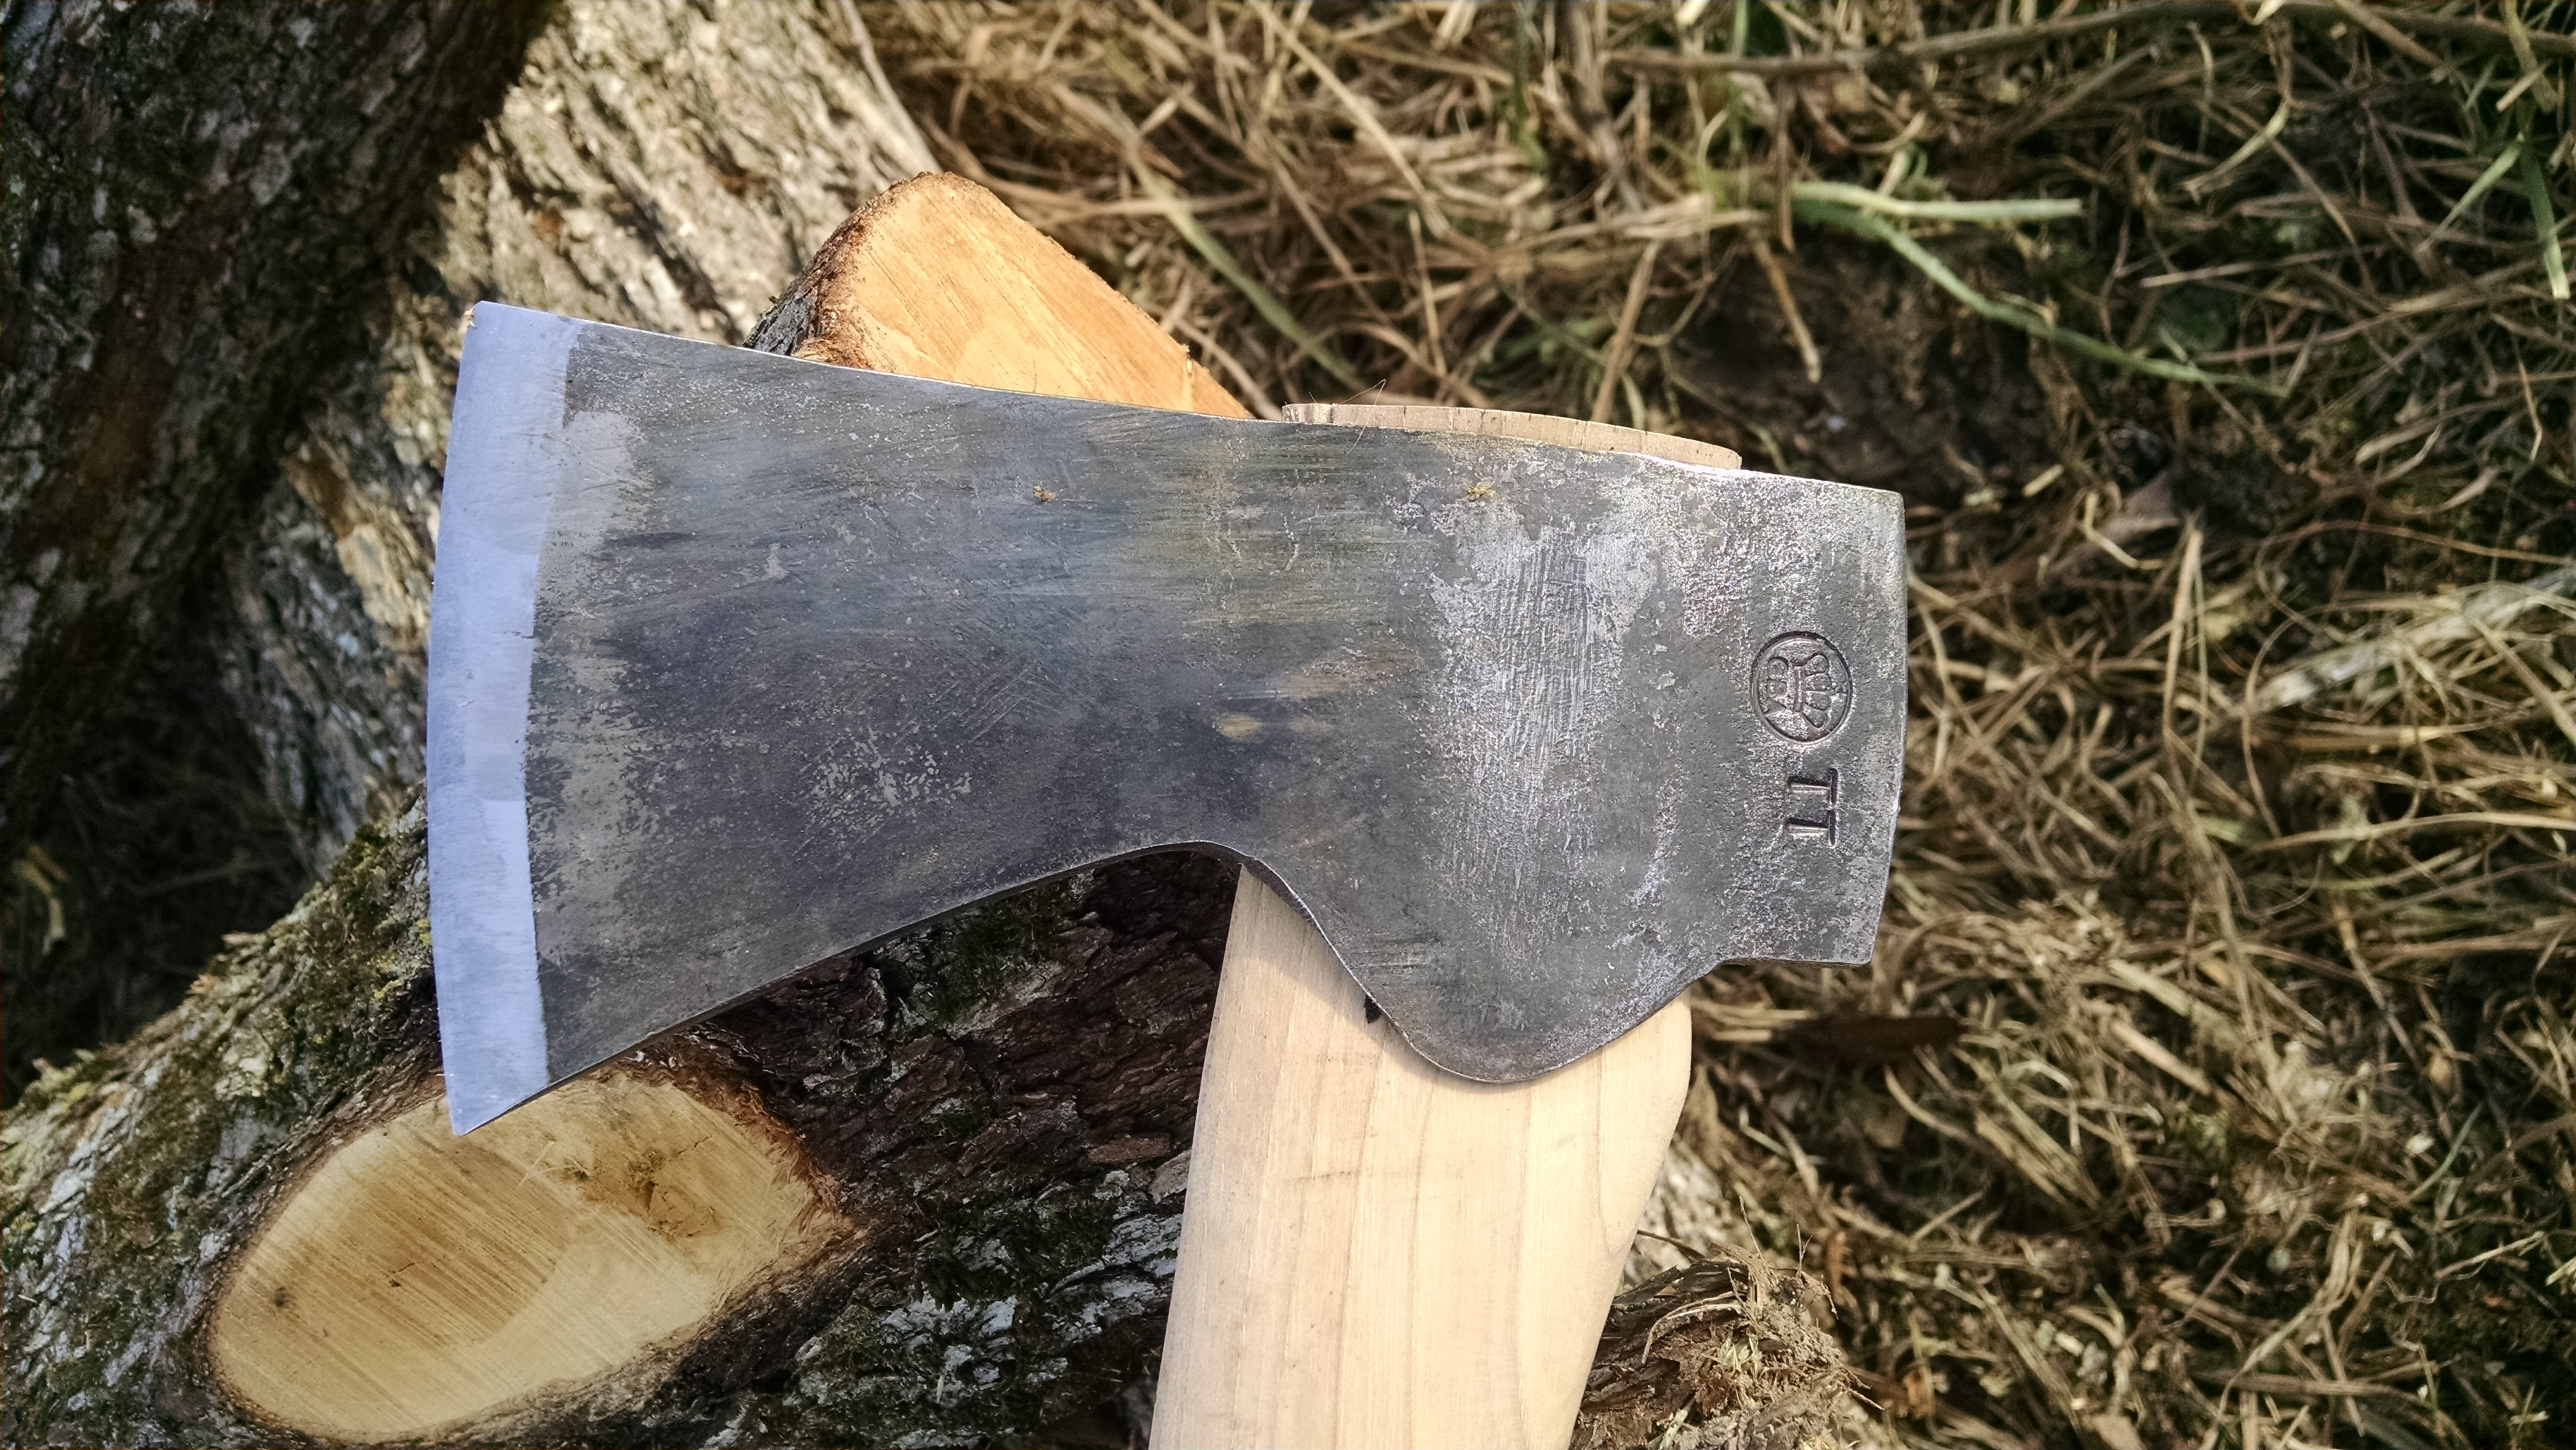 Gransfors Small Forest Axe